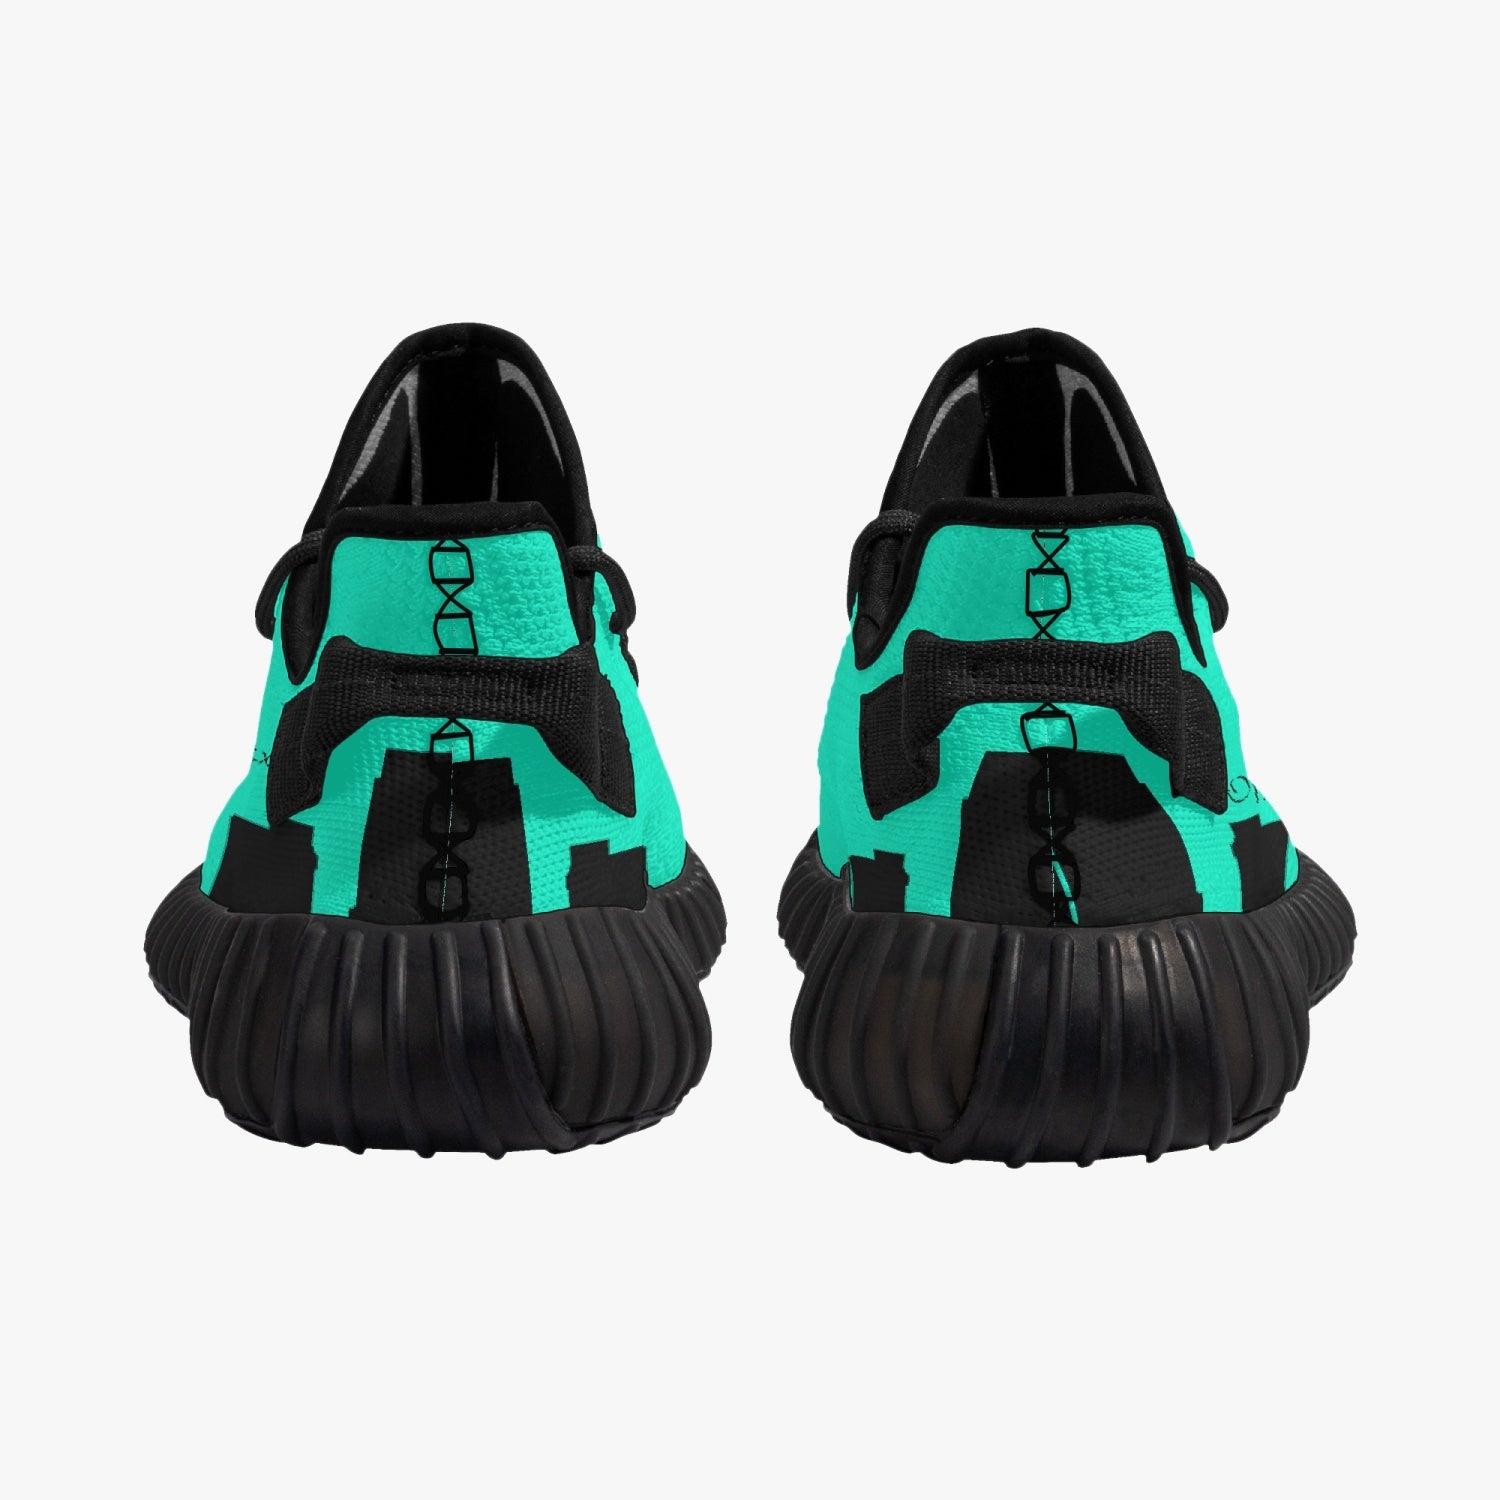 Officially Sexy Sea Green & Black Atlanta Skyline Adult Unisex Mesh Knit Sneakers